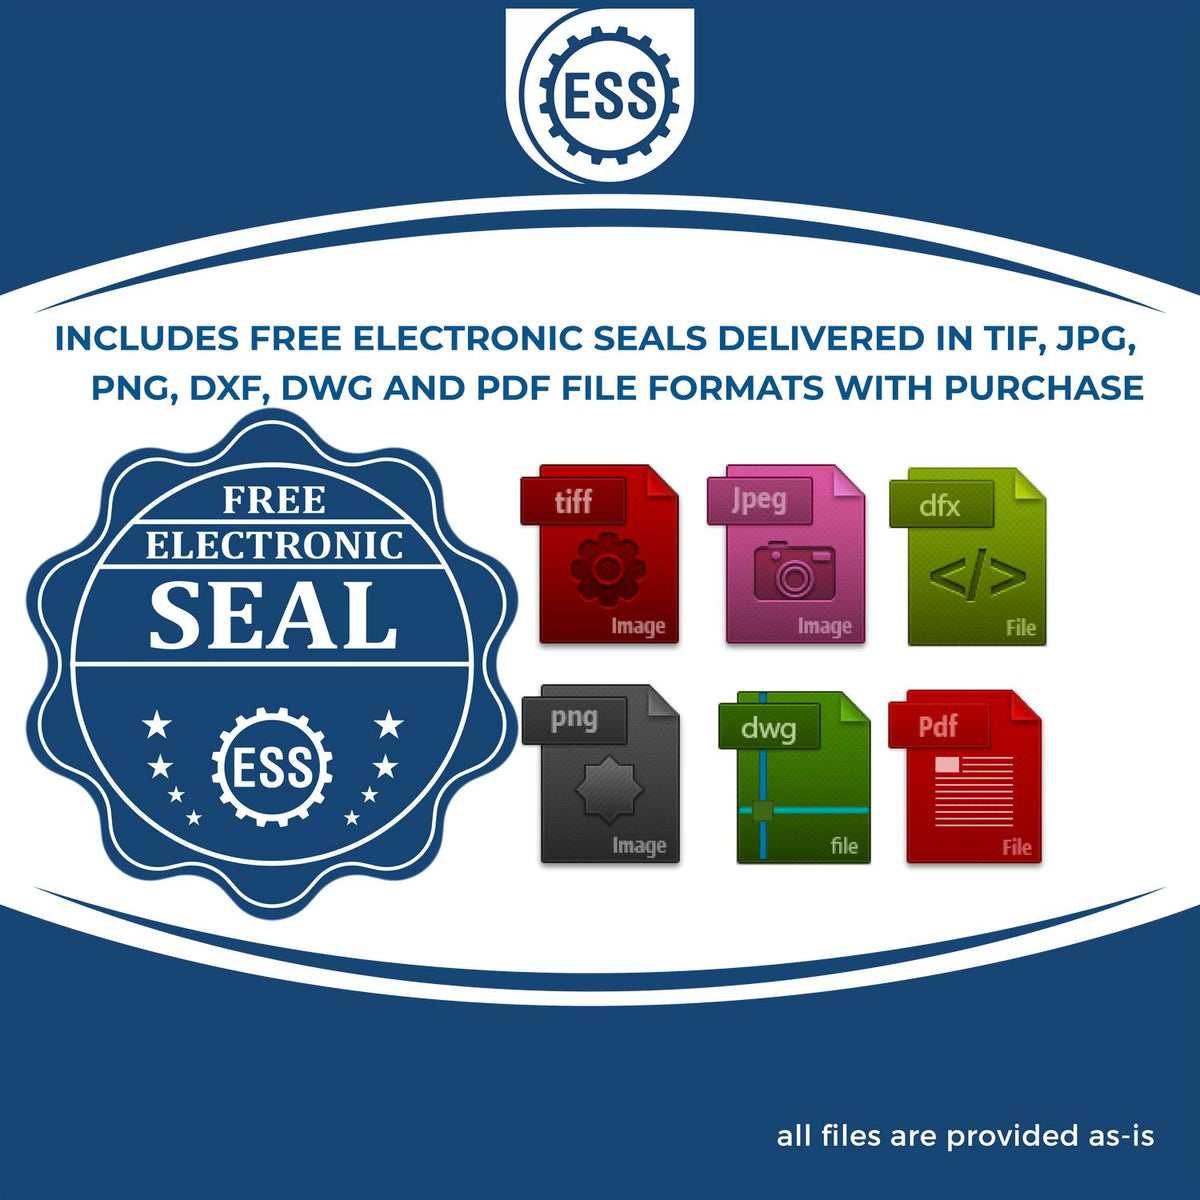 An infographic for the free electronic seal for the Oregon Geologist Desk Seal illustrating the different file type icons such as DXF, DWG, TIF, JPG and PNG.